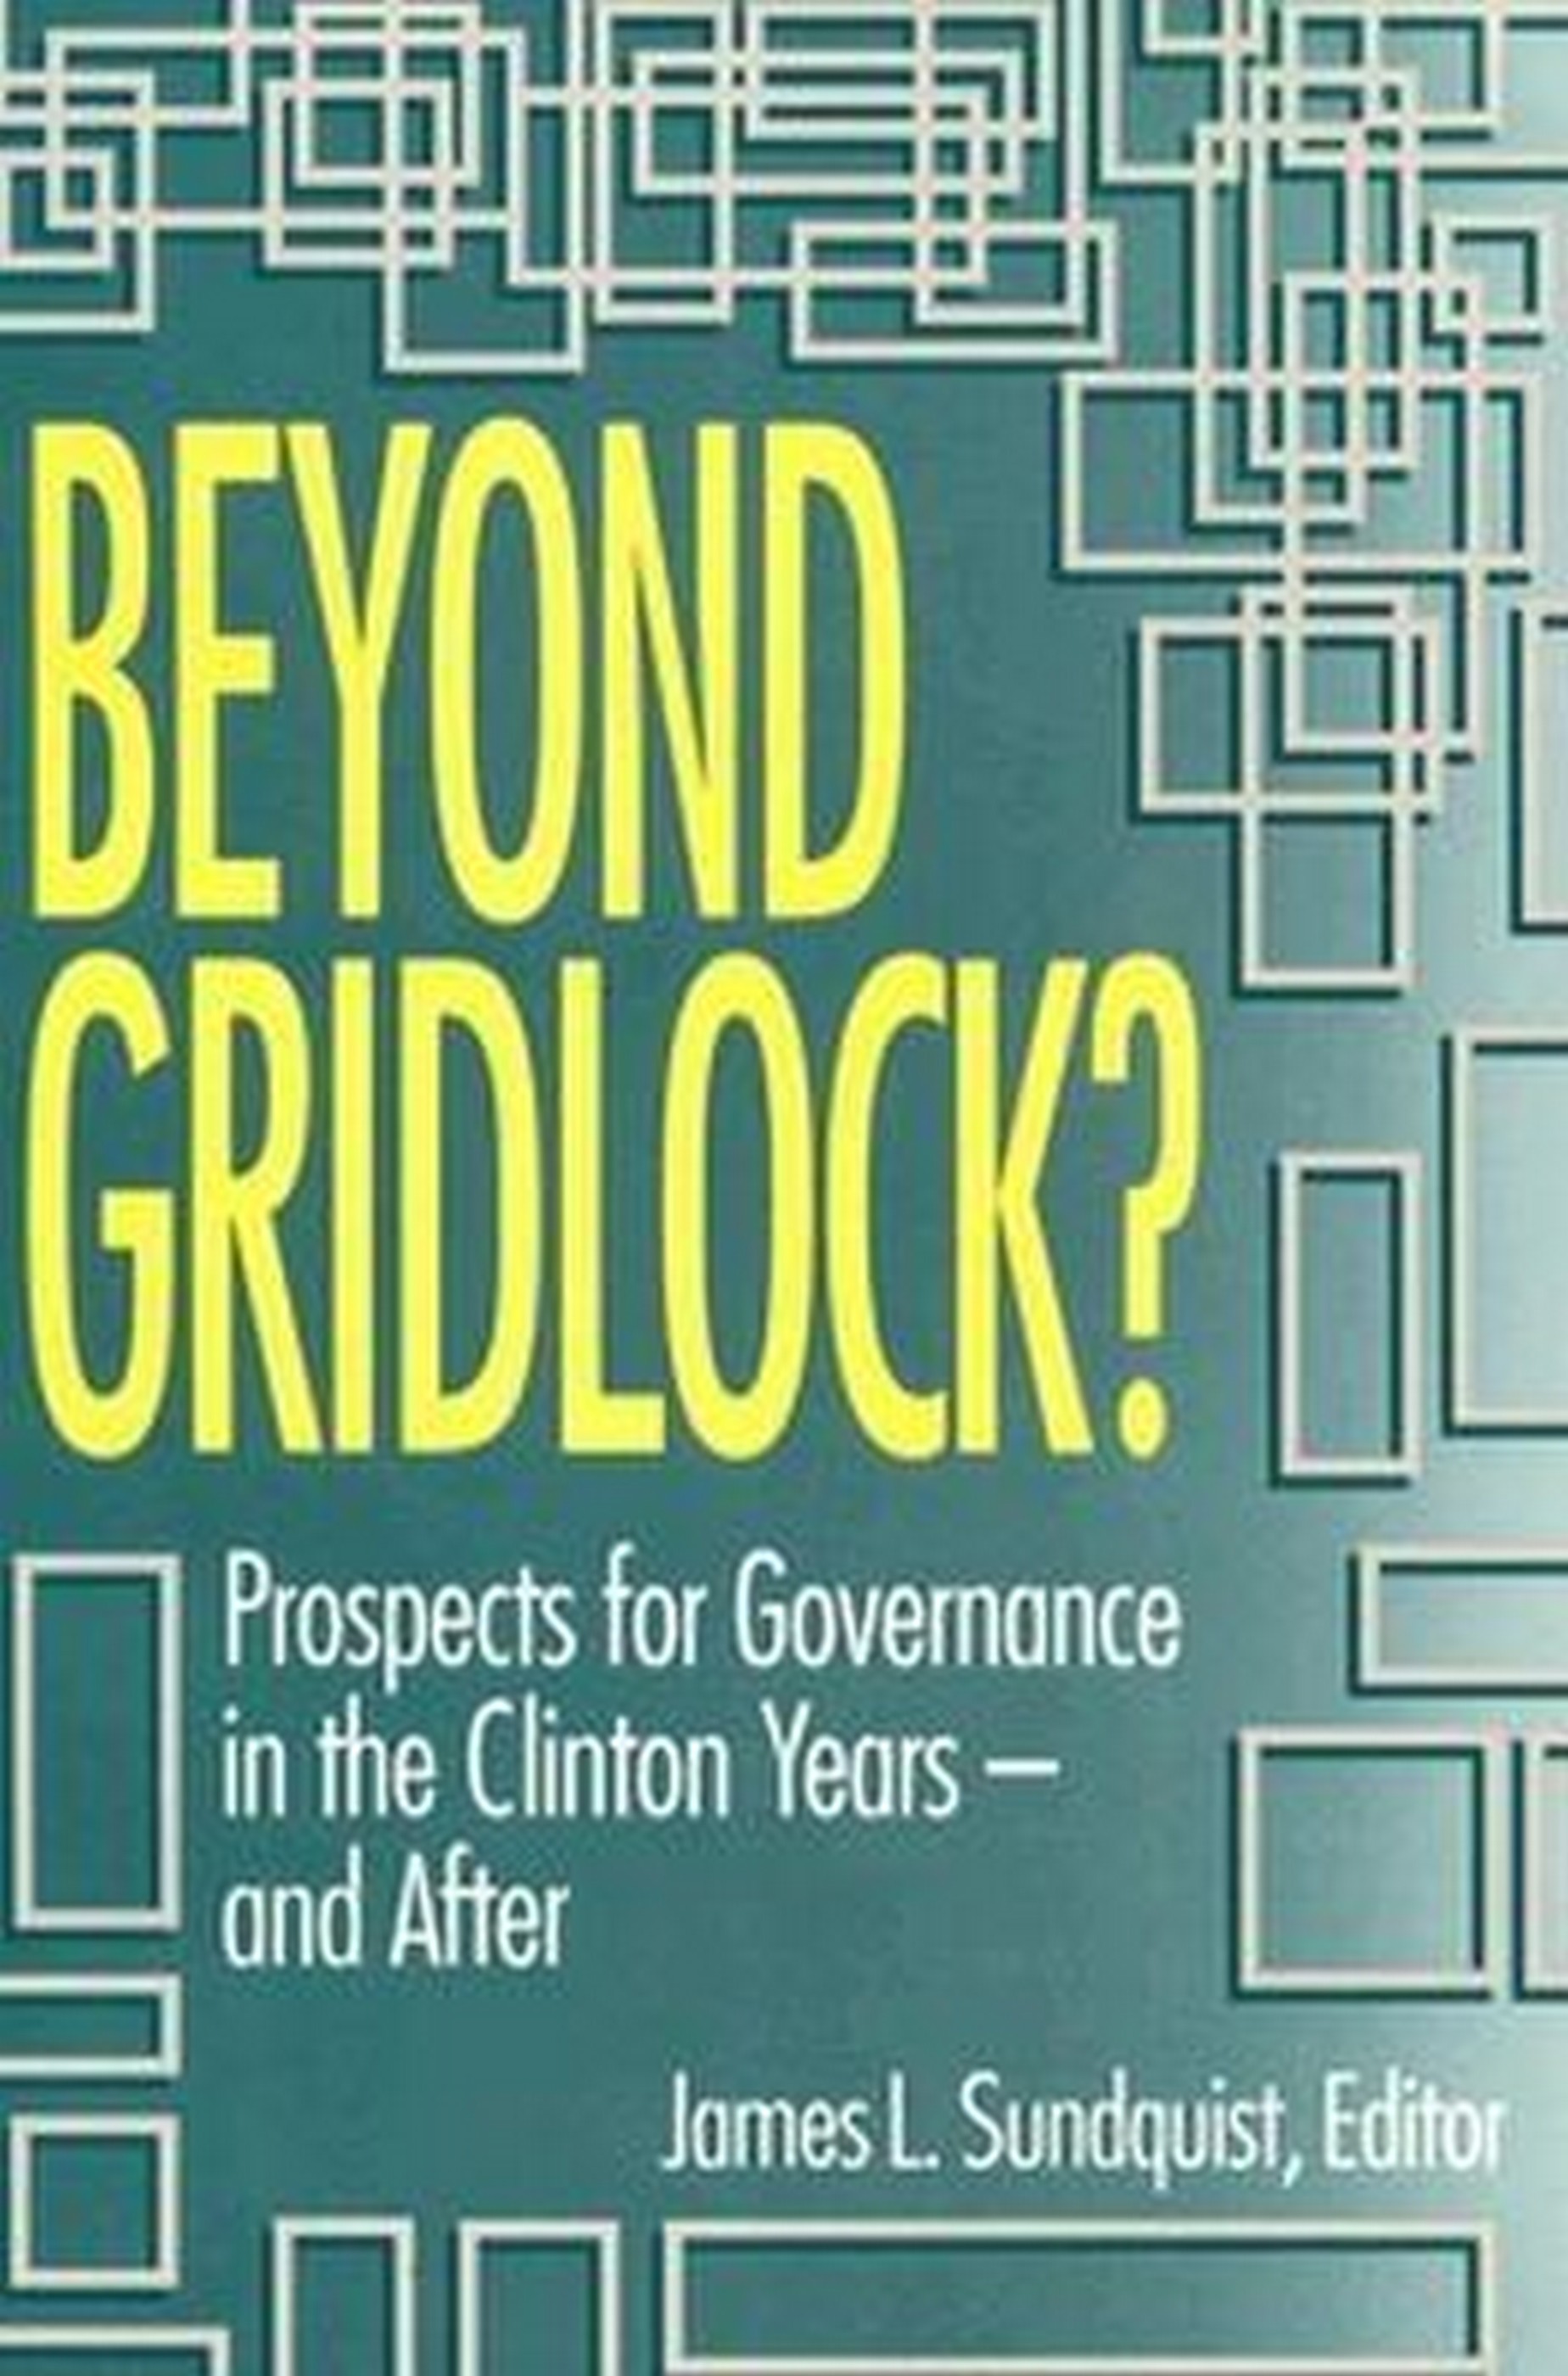 Beyond Gridlock?: Prospects for Governance in the Clinton Years?and After